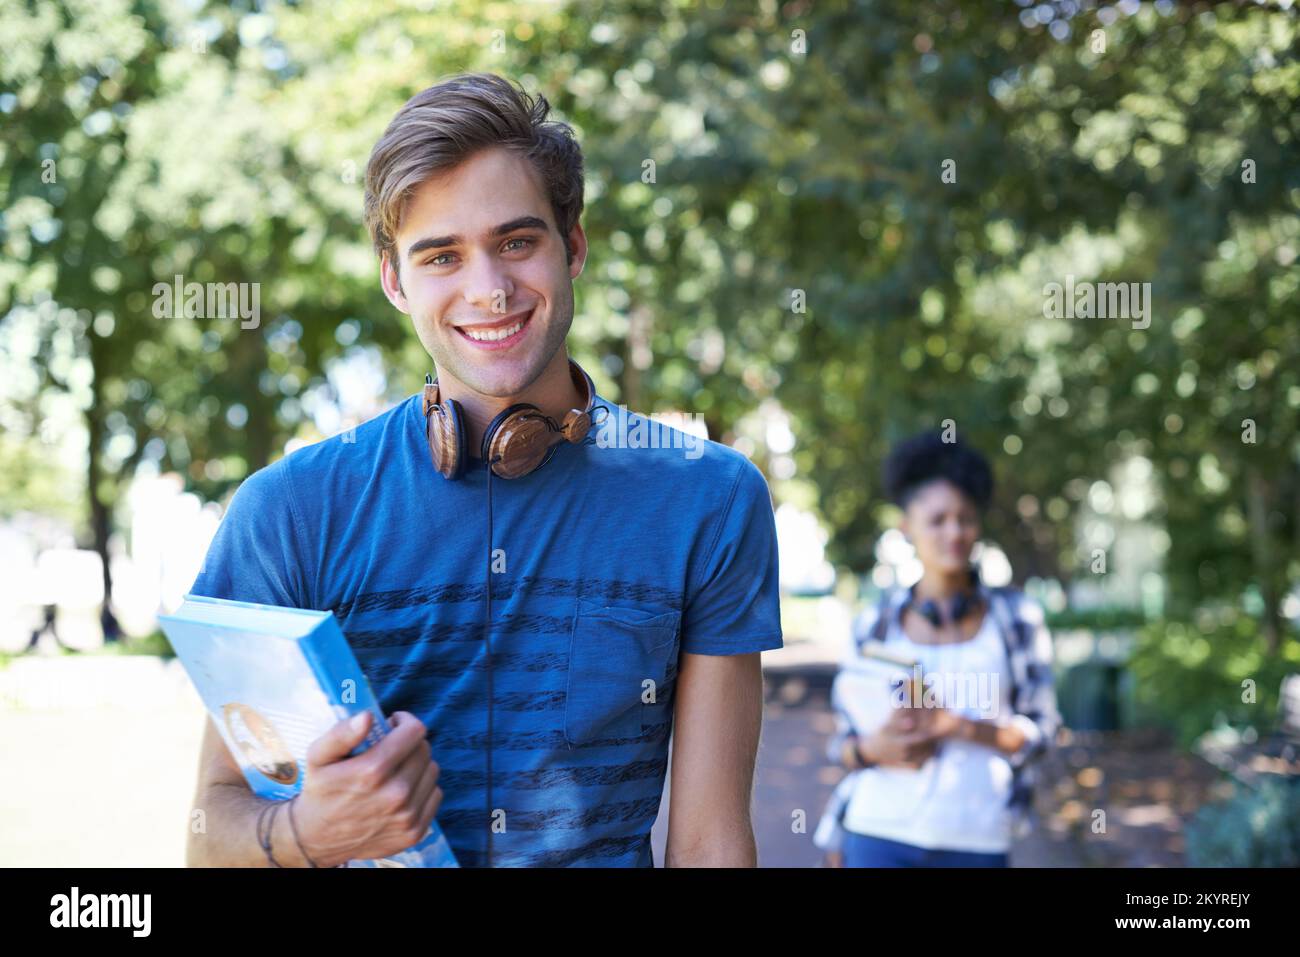 Loving college life. Portrait of a good looking student walking in a park with his study material. Stock Photo